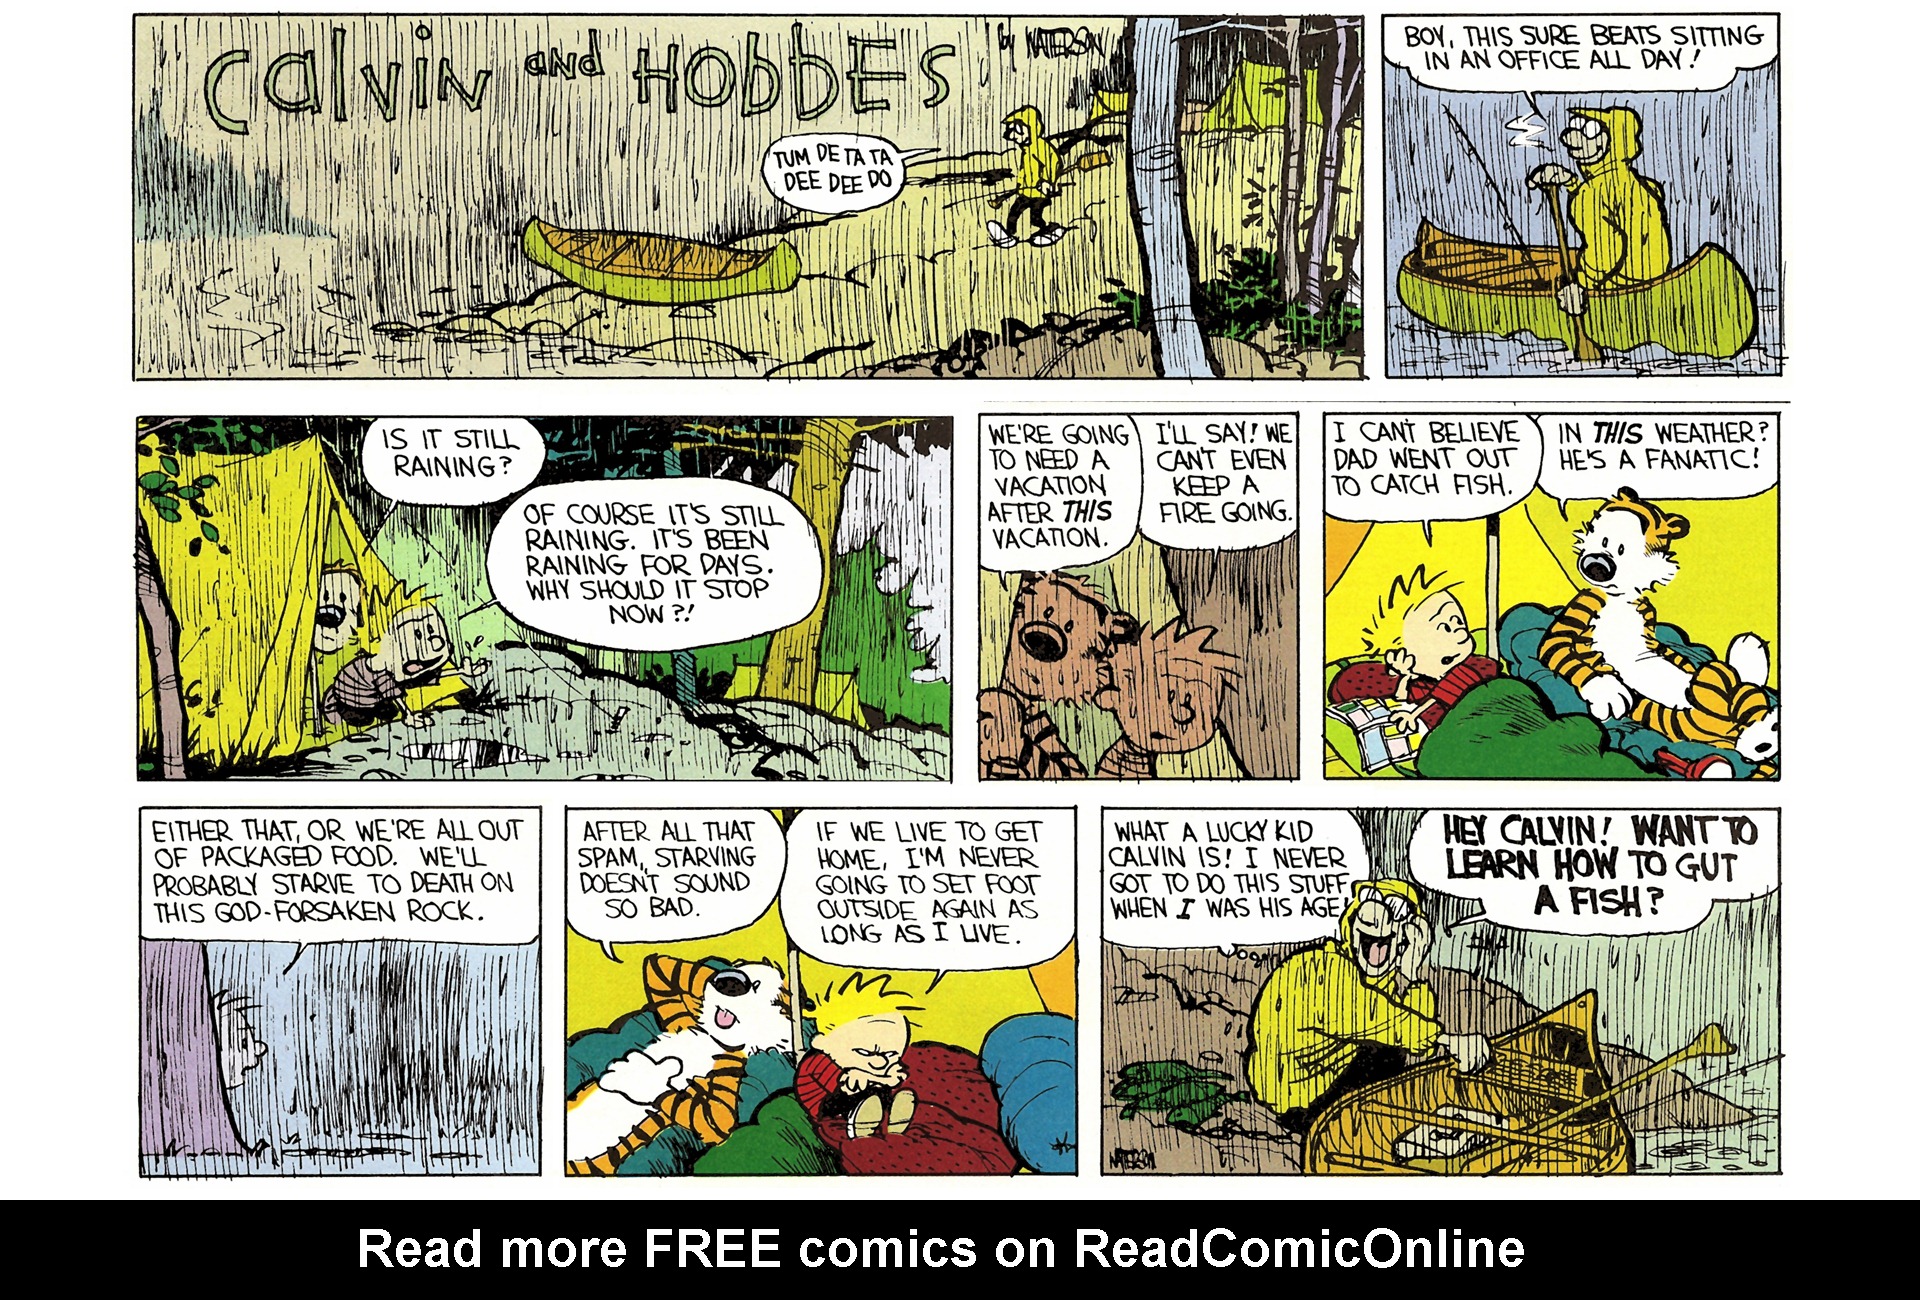 Read online Calvin and Hobbes comic - Issue #3 - 54.